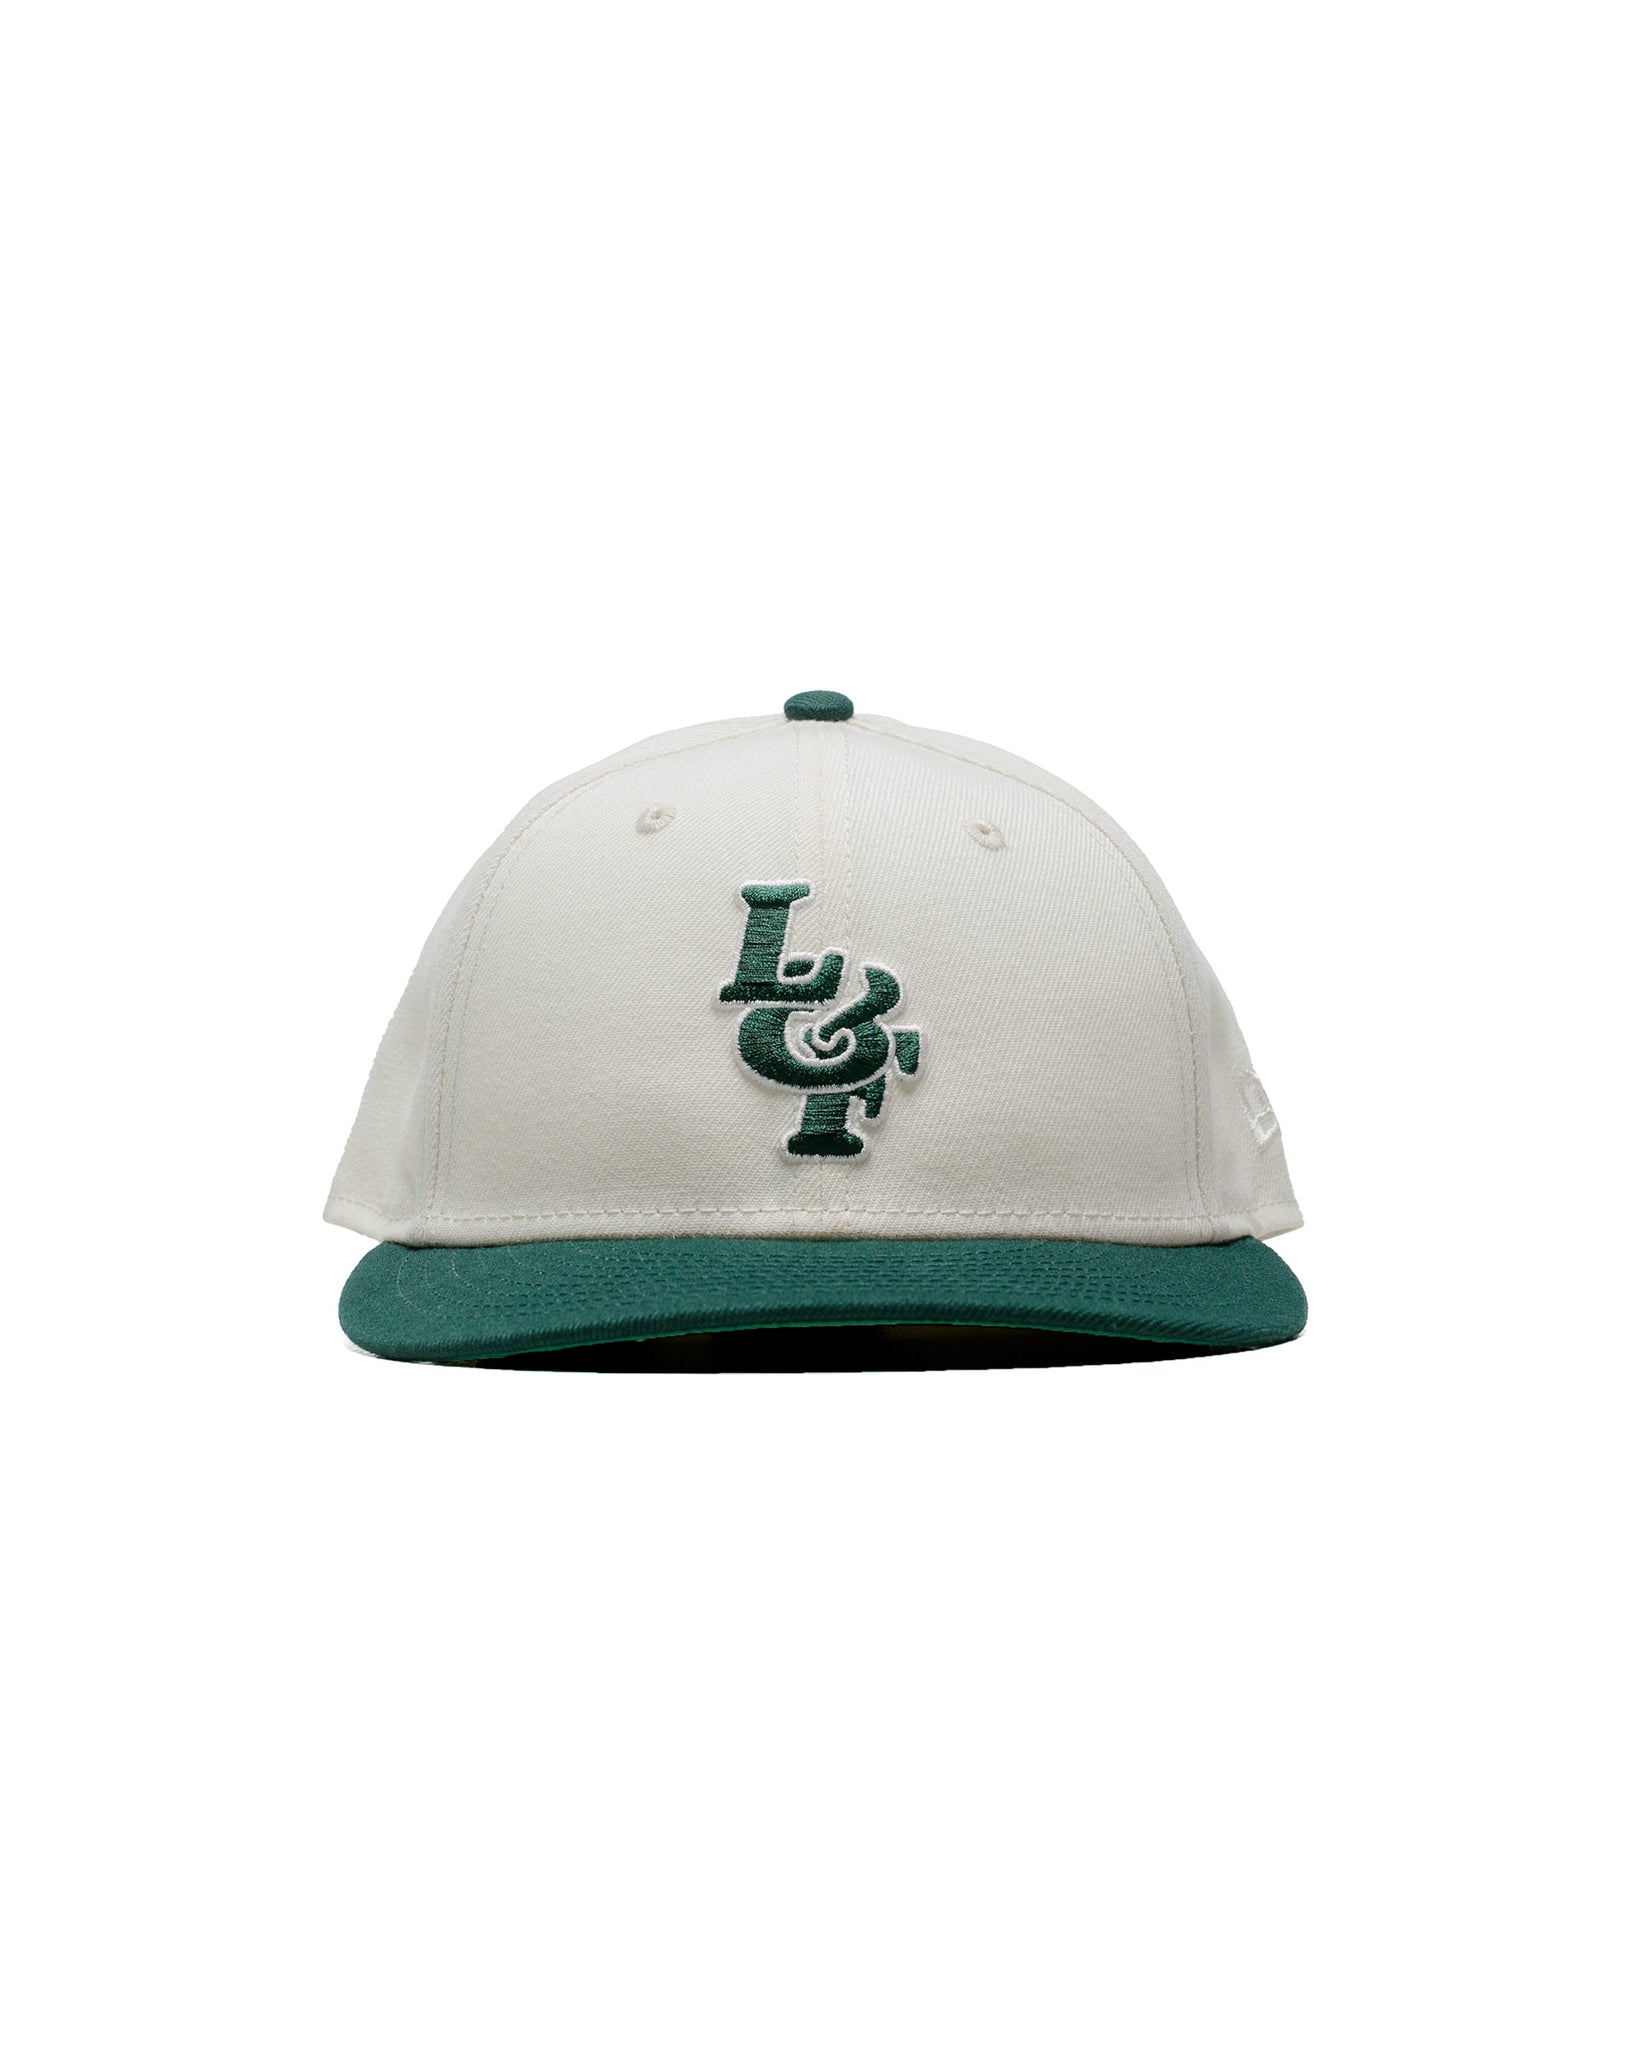 Plain Fitted Hat - Forest Green, 7 1/8 